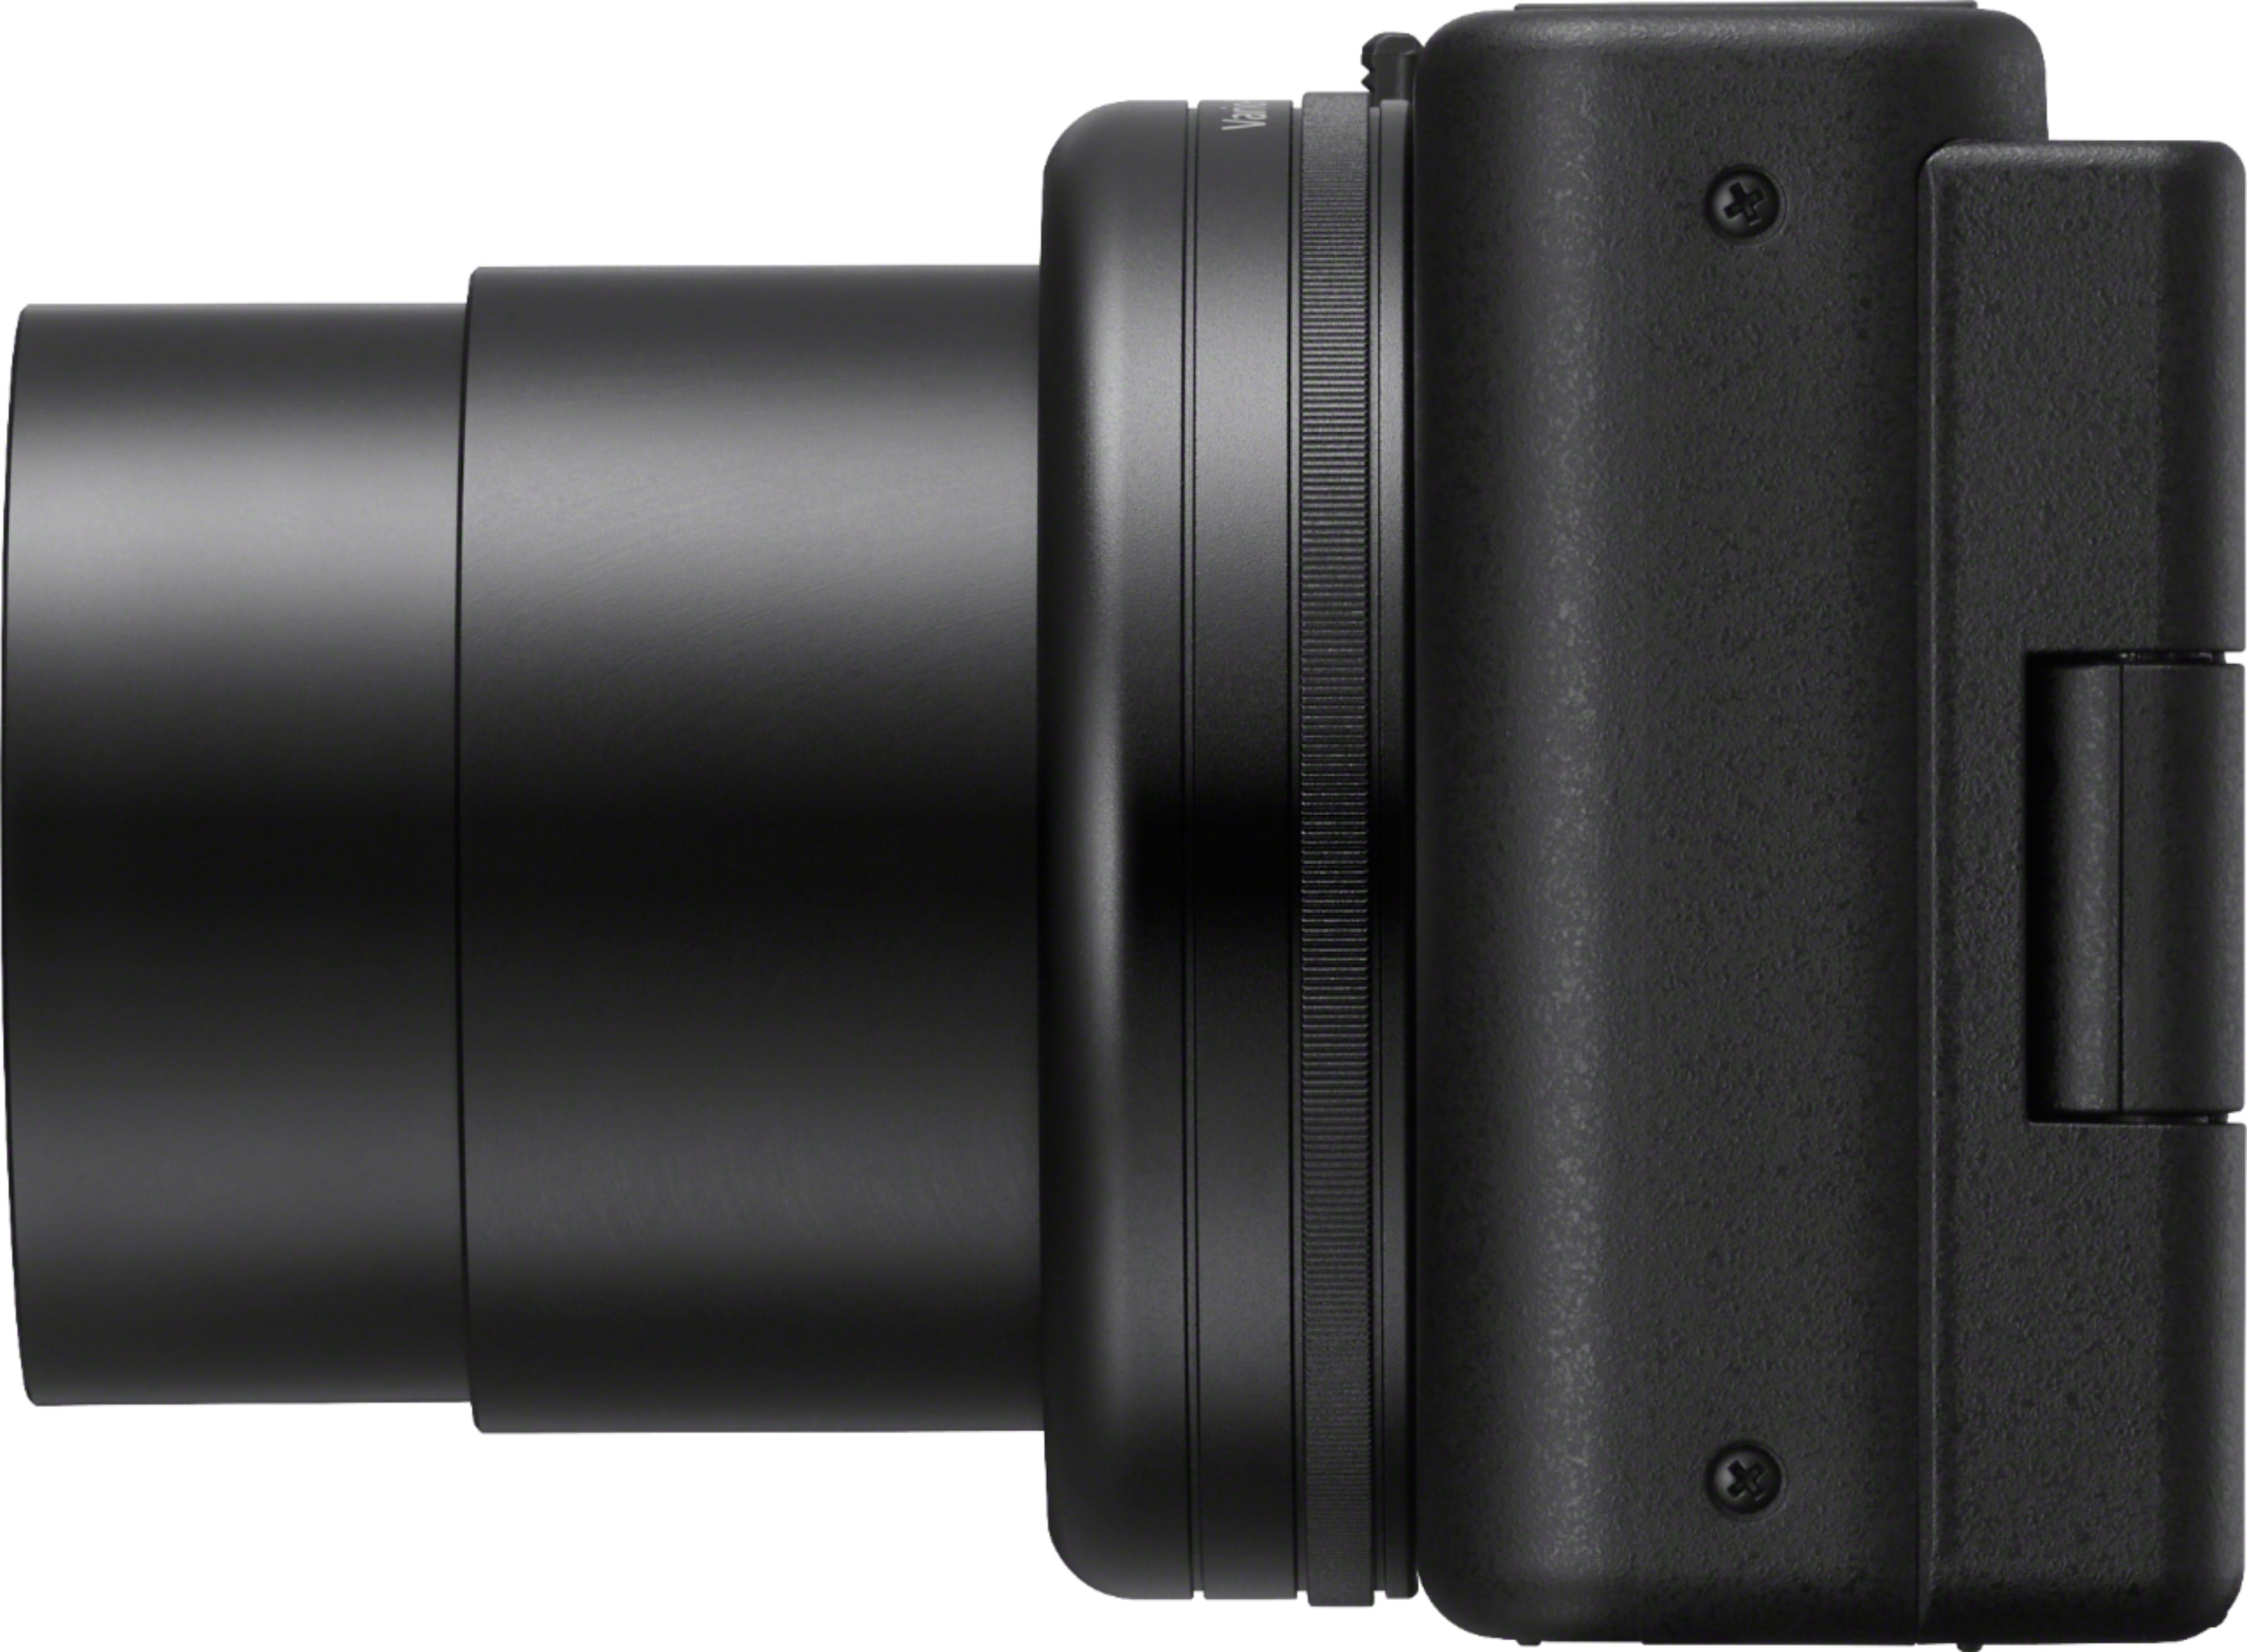 Sony ZV-1 Camera for Content Creators and Vloggers